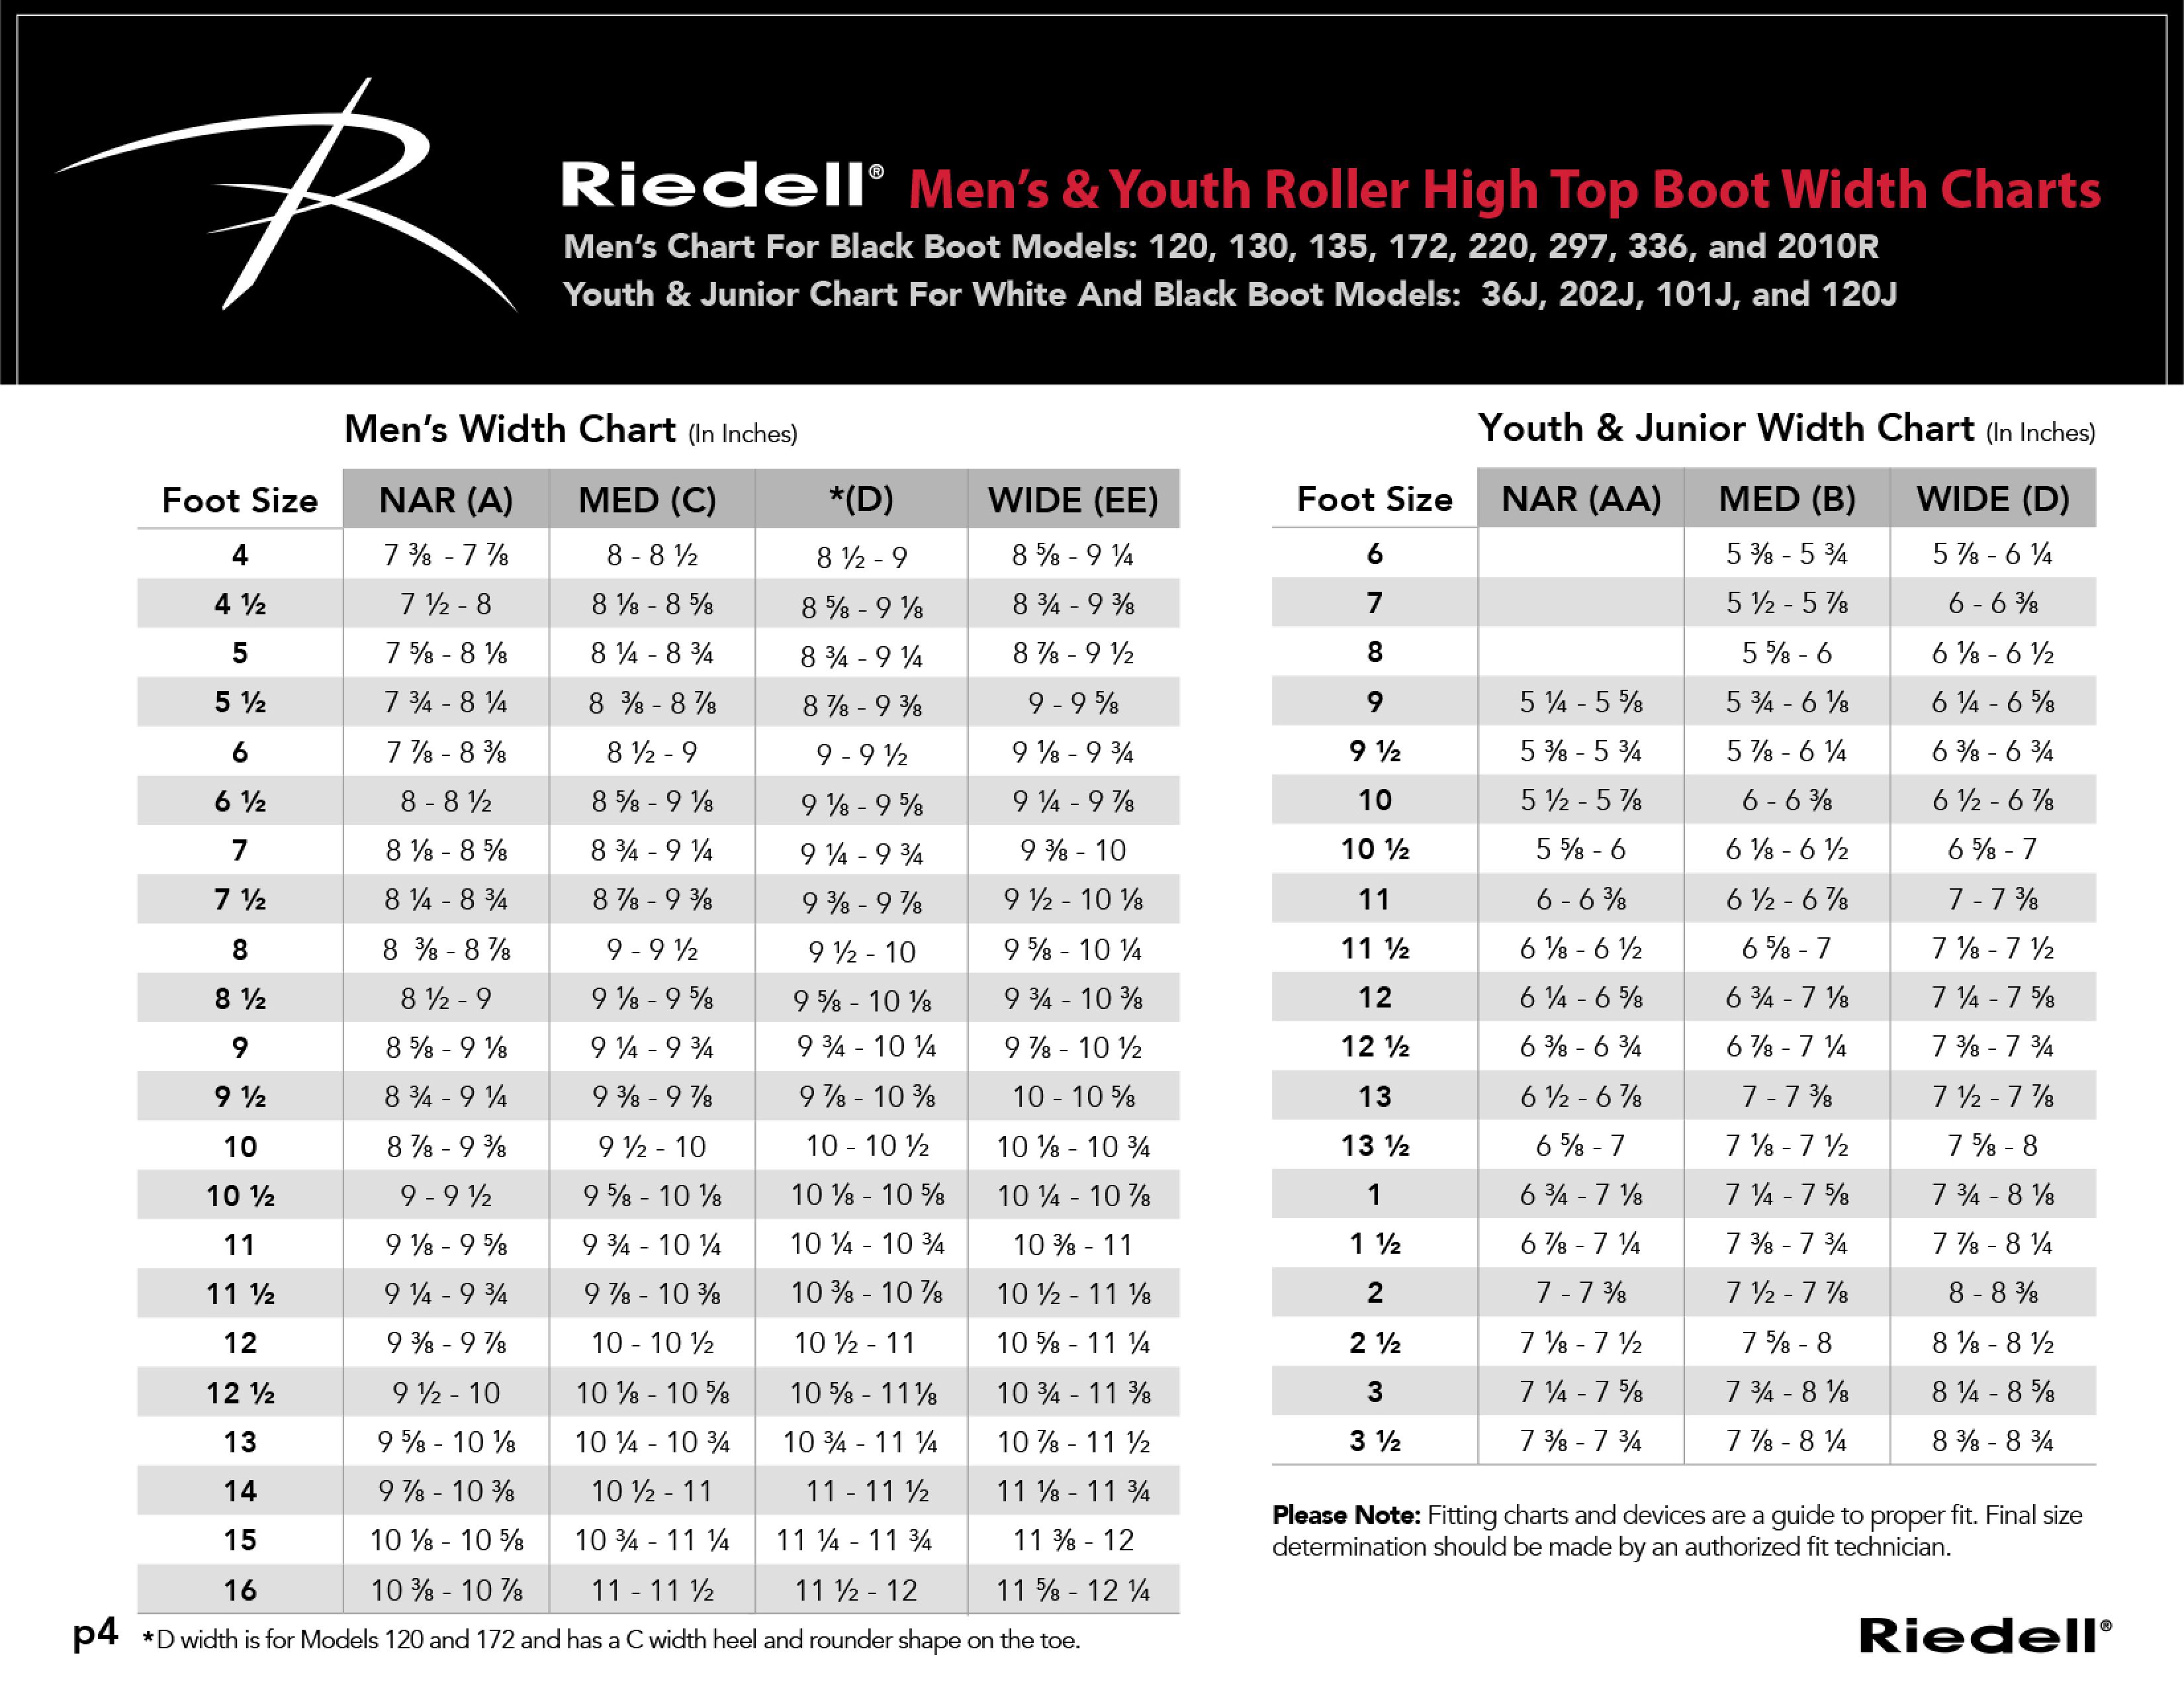 Riedell High Top Skates Sizing Chart